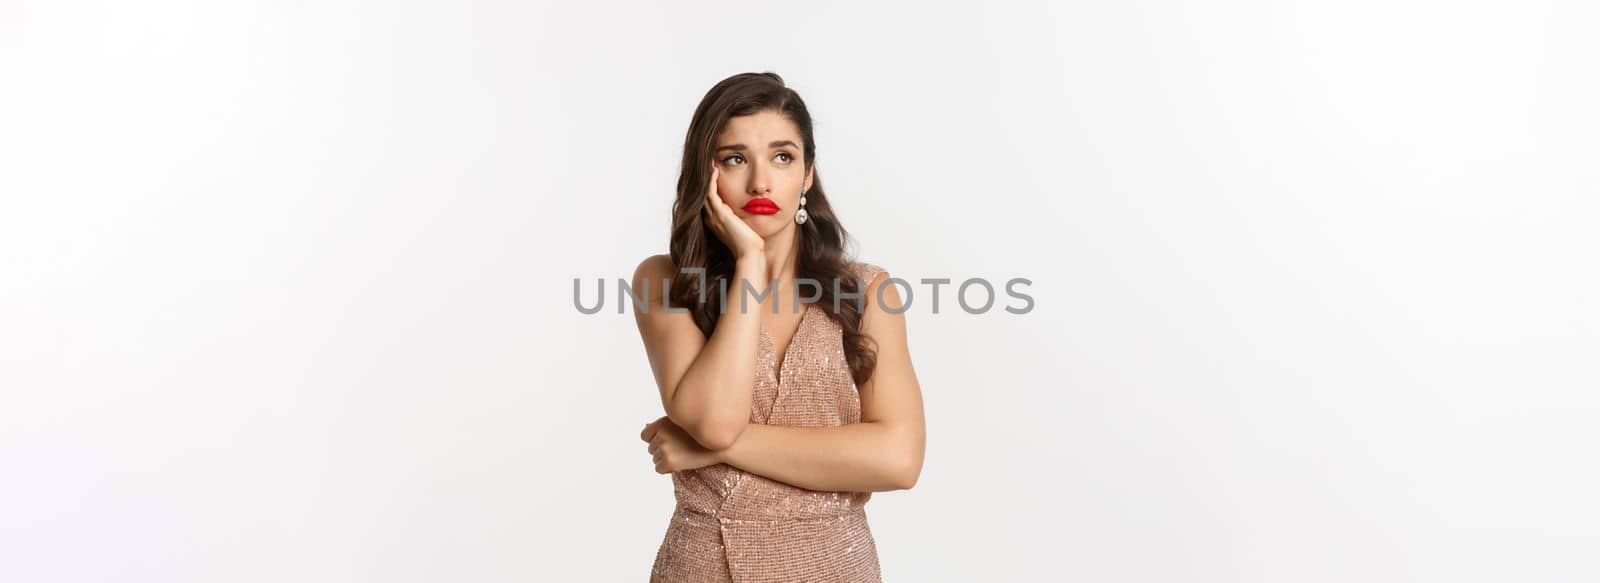 Bored and thoughtful young woman dreaming, looking away and imaging something with sad face, standing in glamour dress and waiting, standing over white background.